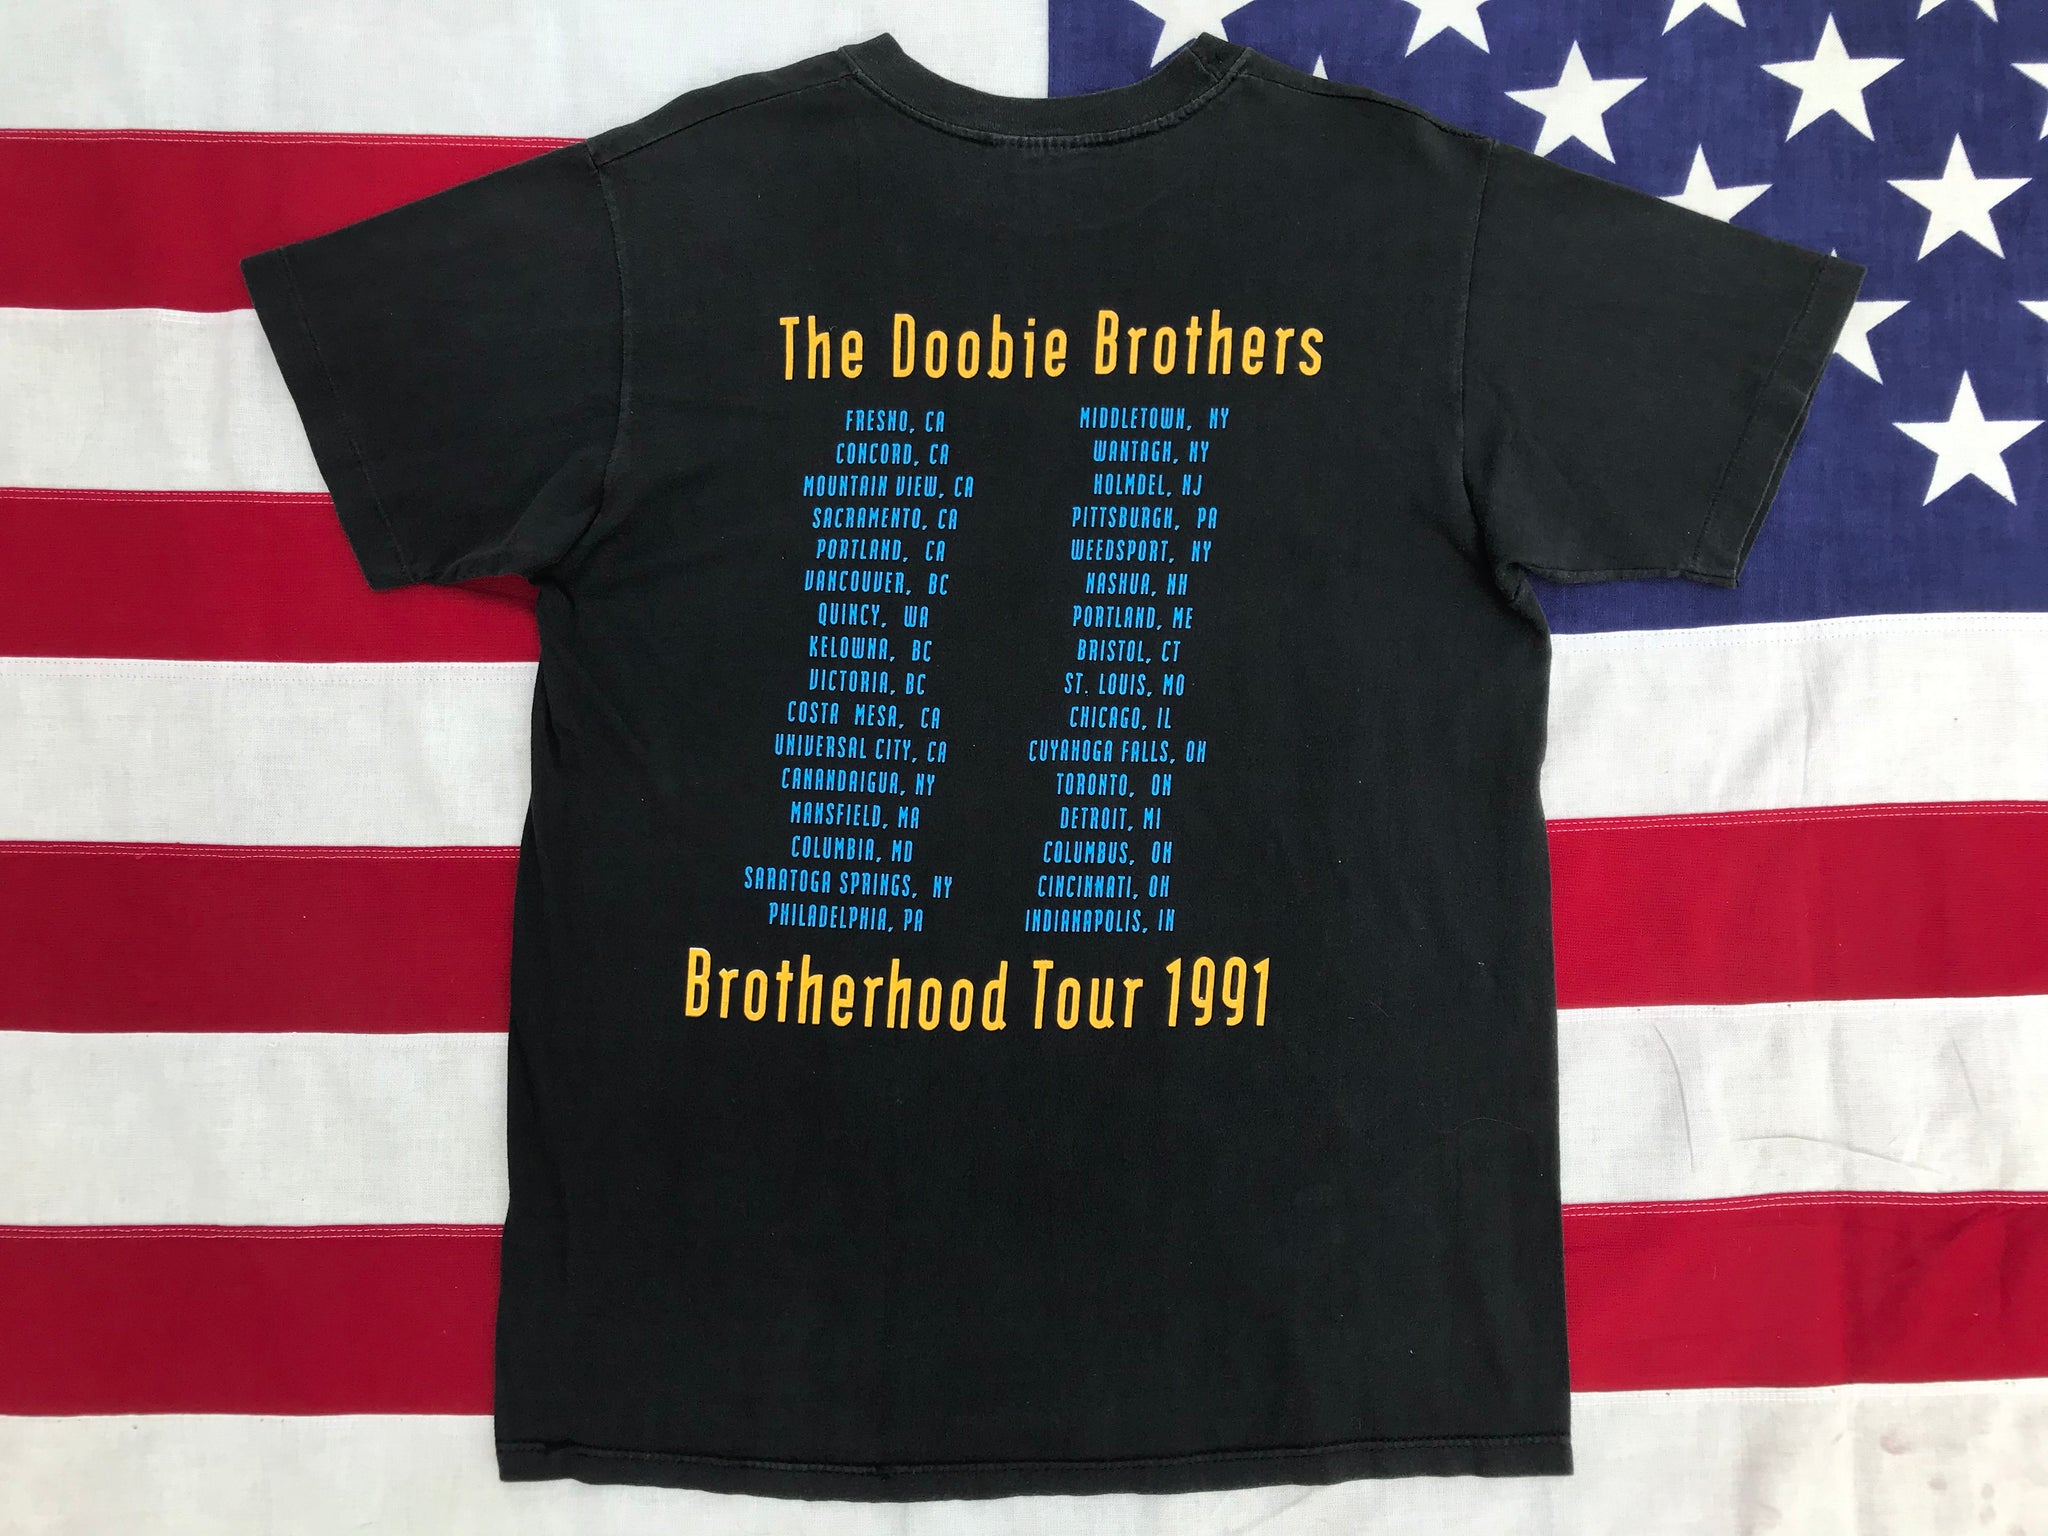 The Doobie Brothers “ Brotherhood Tour 1991 “ Original Vintage Rock T-Shirt by Hanes Made in USA